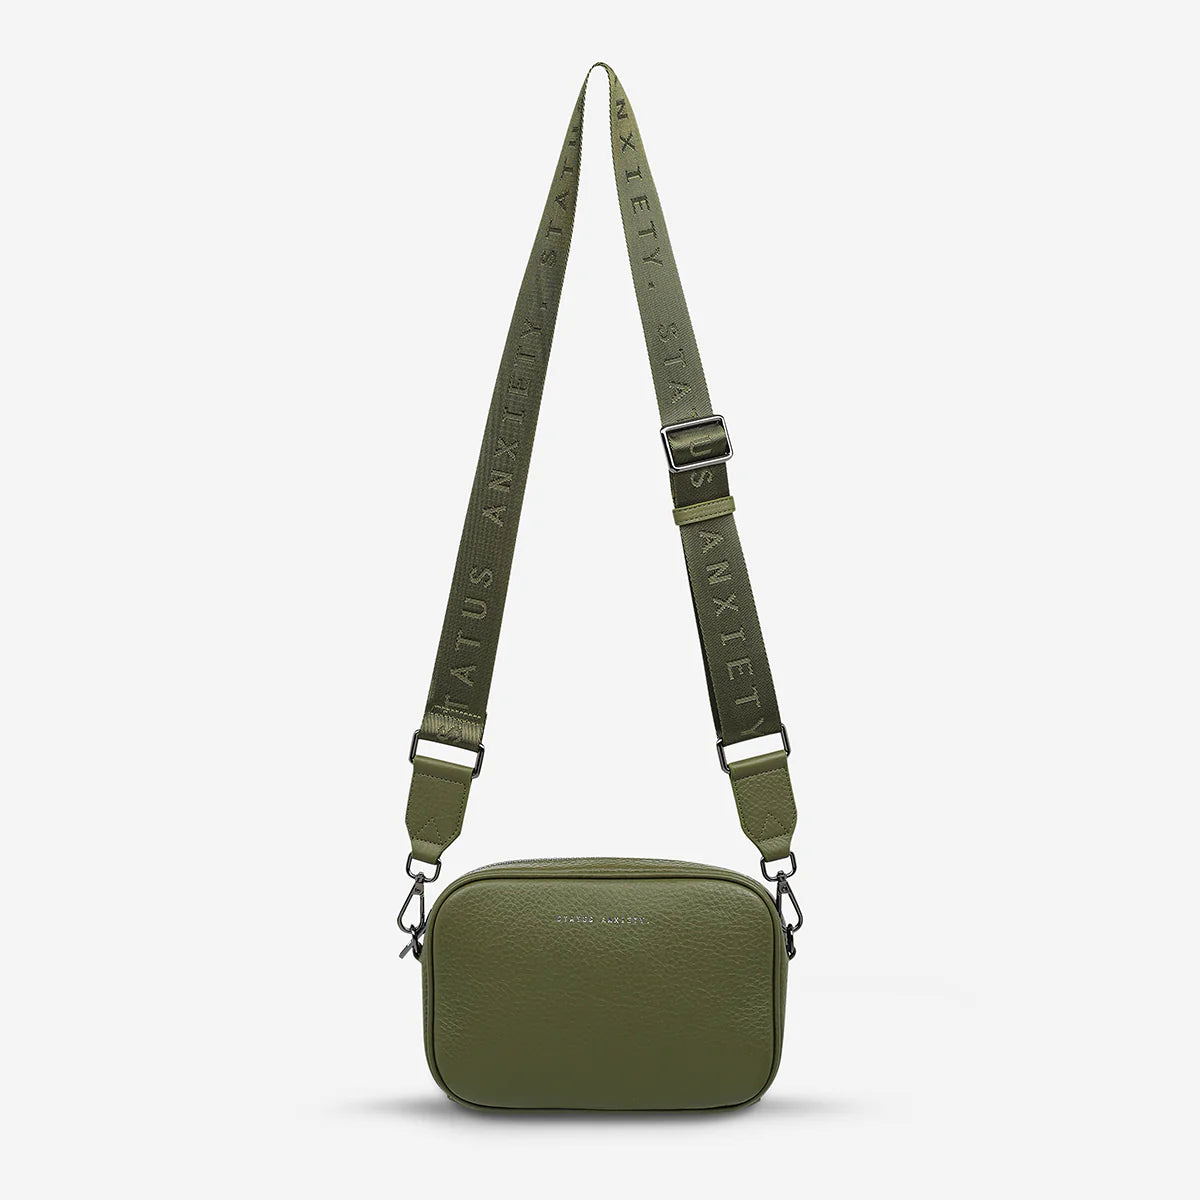 Status anxiety plunder bag with webbed strap  - khaki